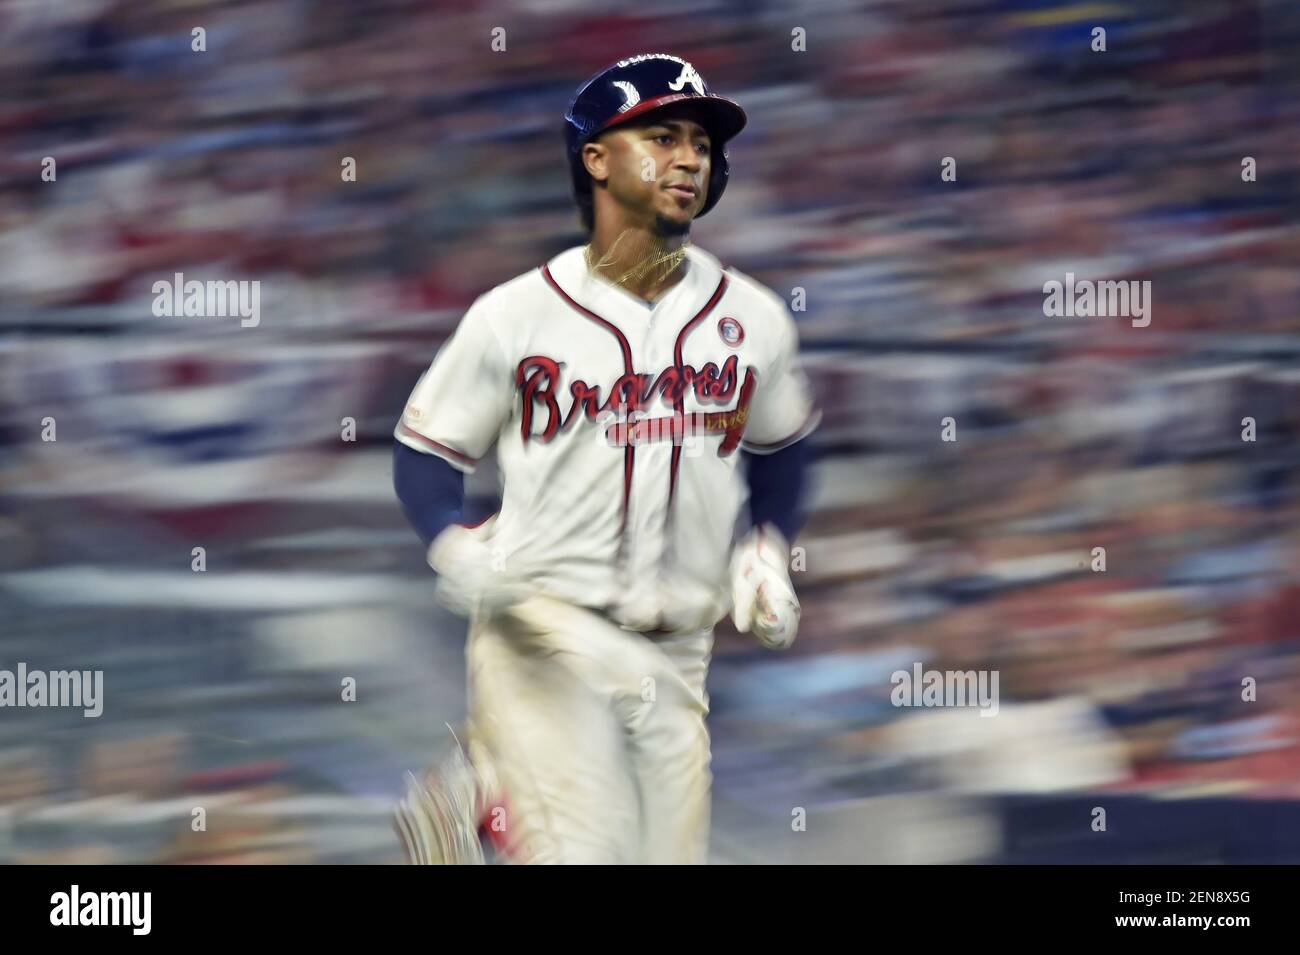 July 04, 2019: Atlanta Braves infielder Ozzie Albies heads to first base  after hitting a single during the eighth inning of a MLB game against the  Philadelphia Phillies at SunTrust Park in